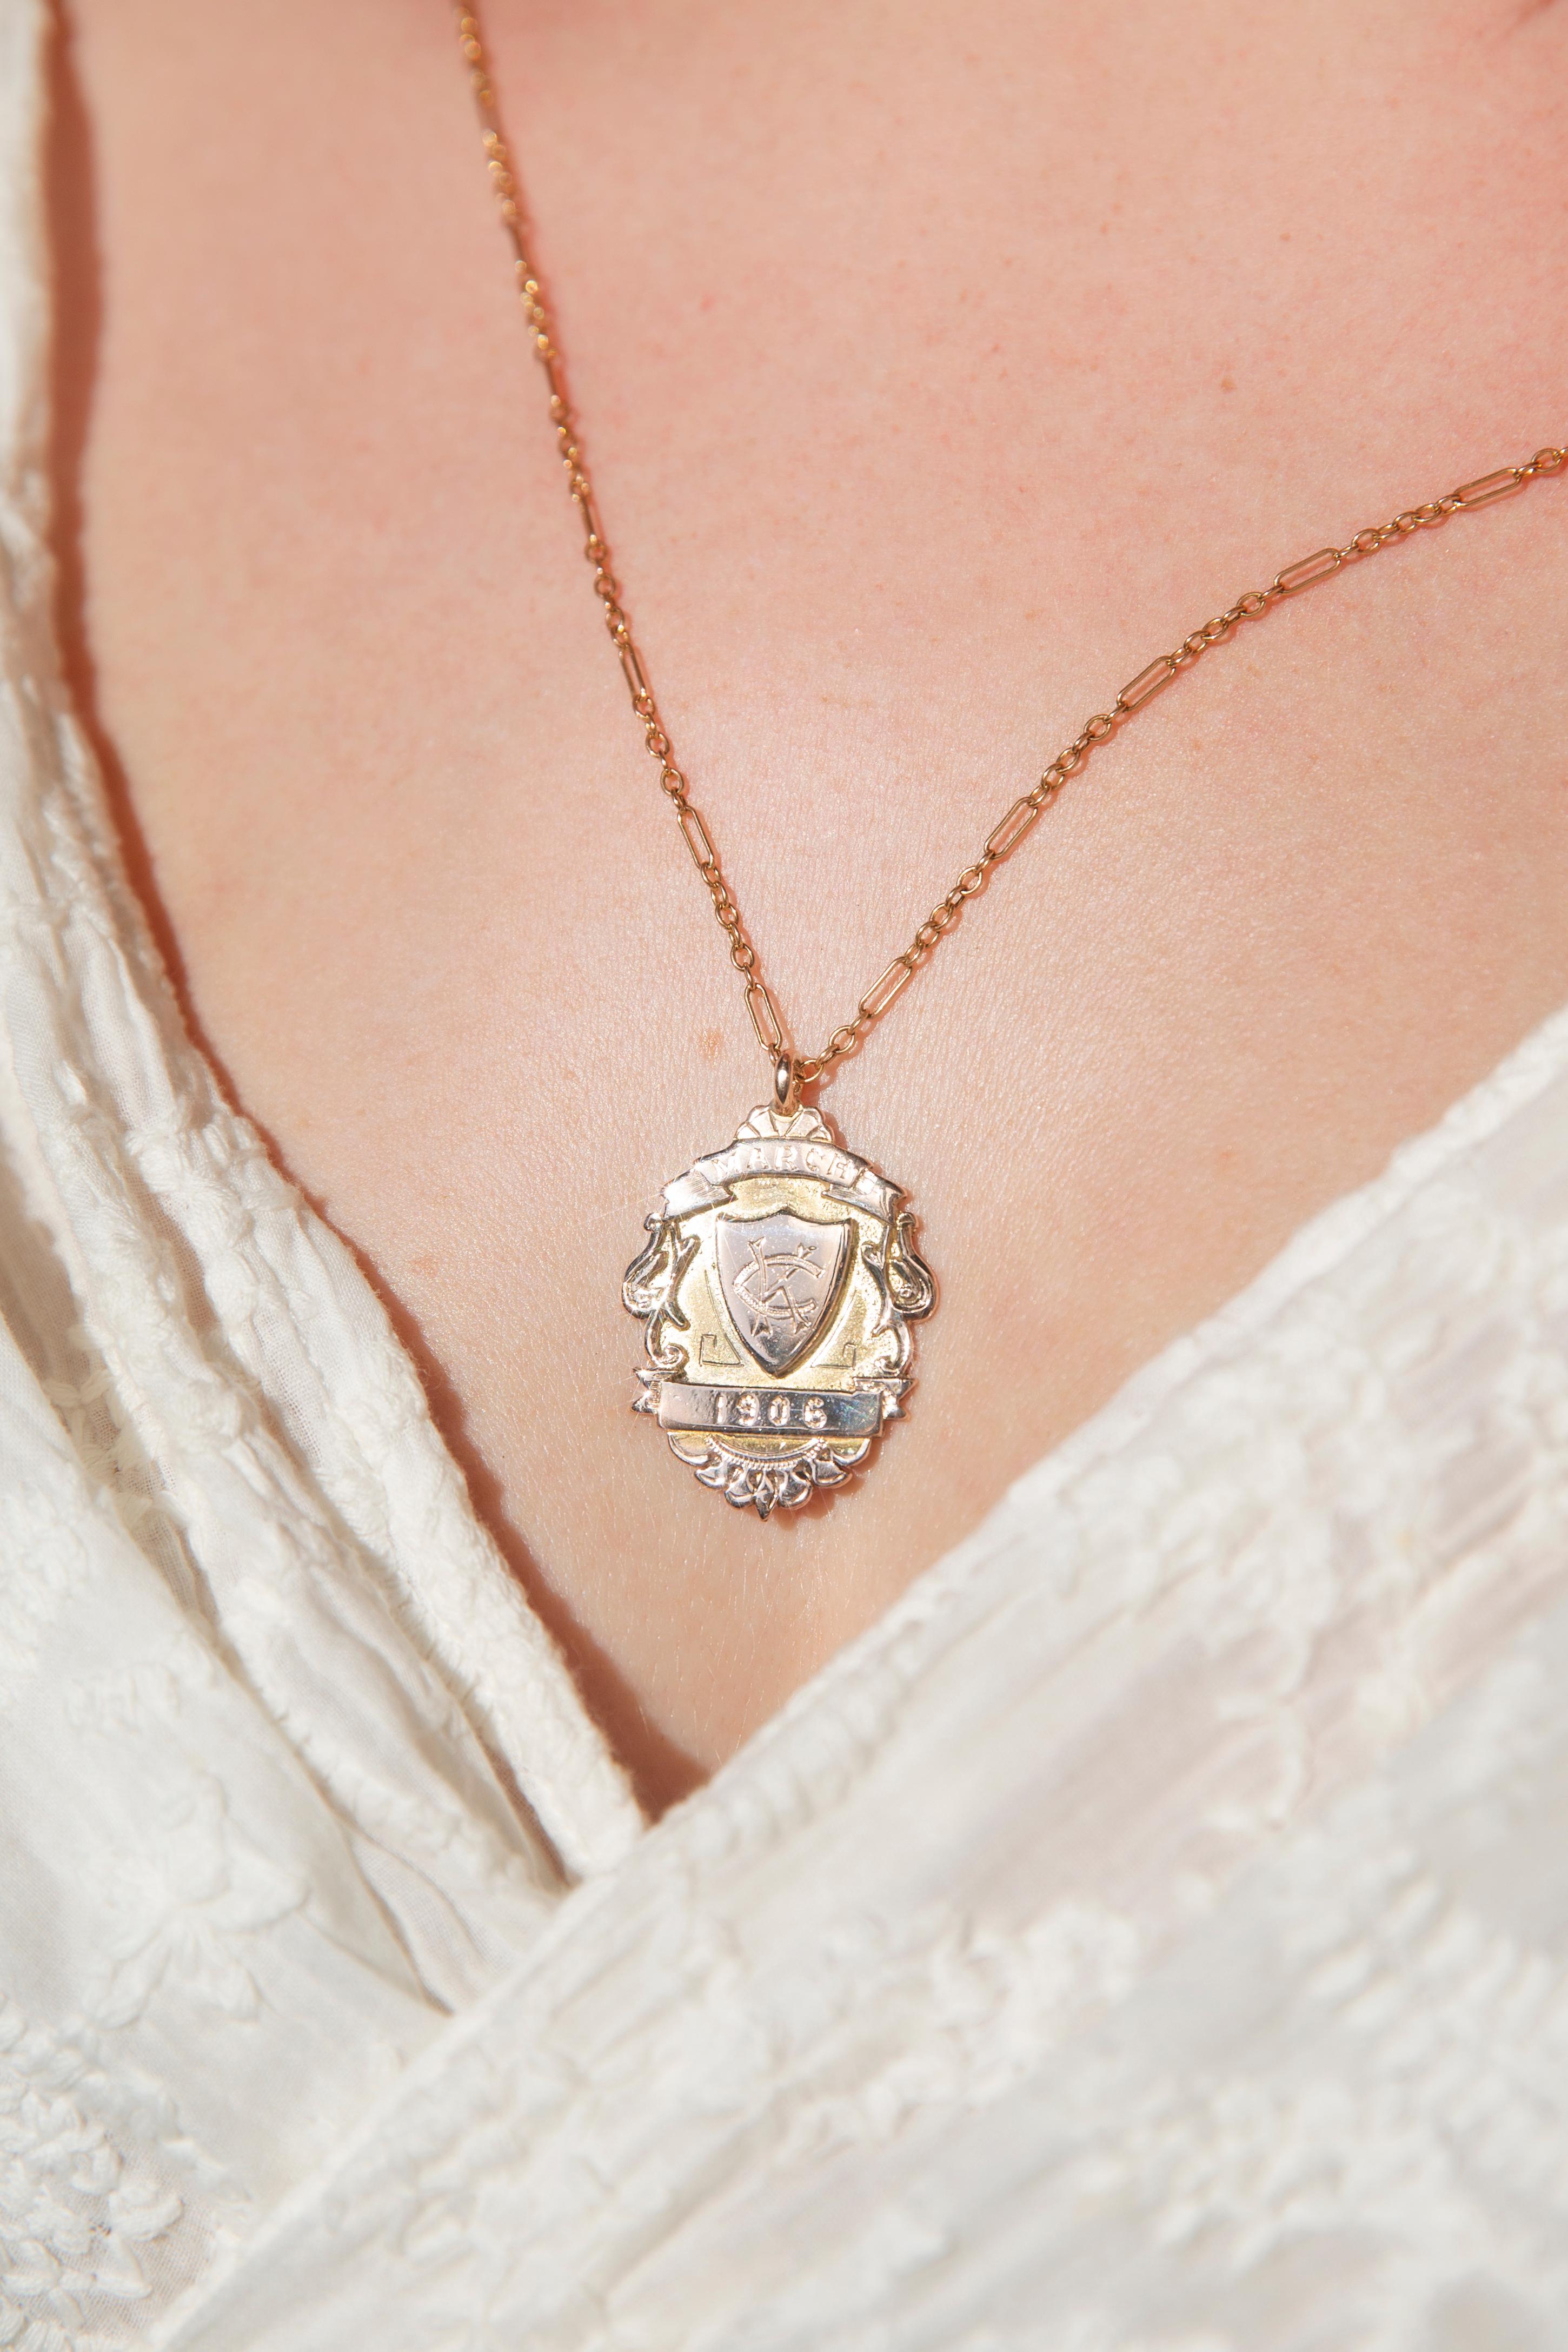 Crafted in 9 carat yellow gold, this lovely vintage antique pendant from 1906, during the Edwardian era, features a coat of arms with a shield at the centre inscribed with 